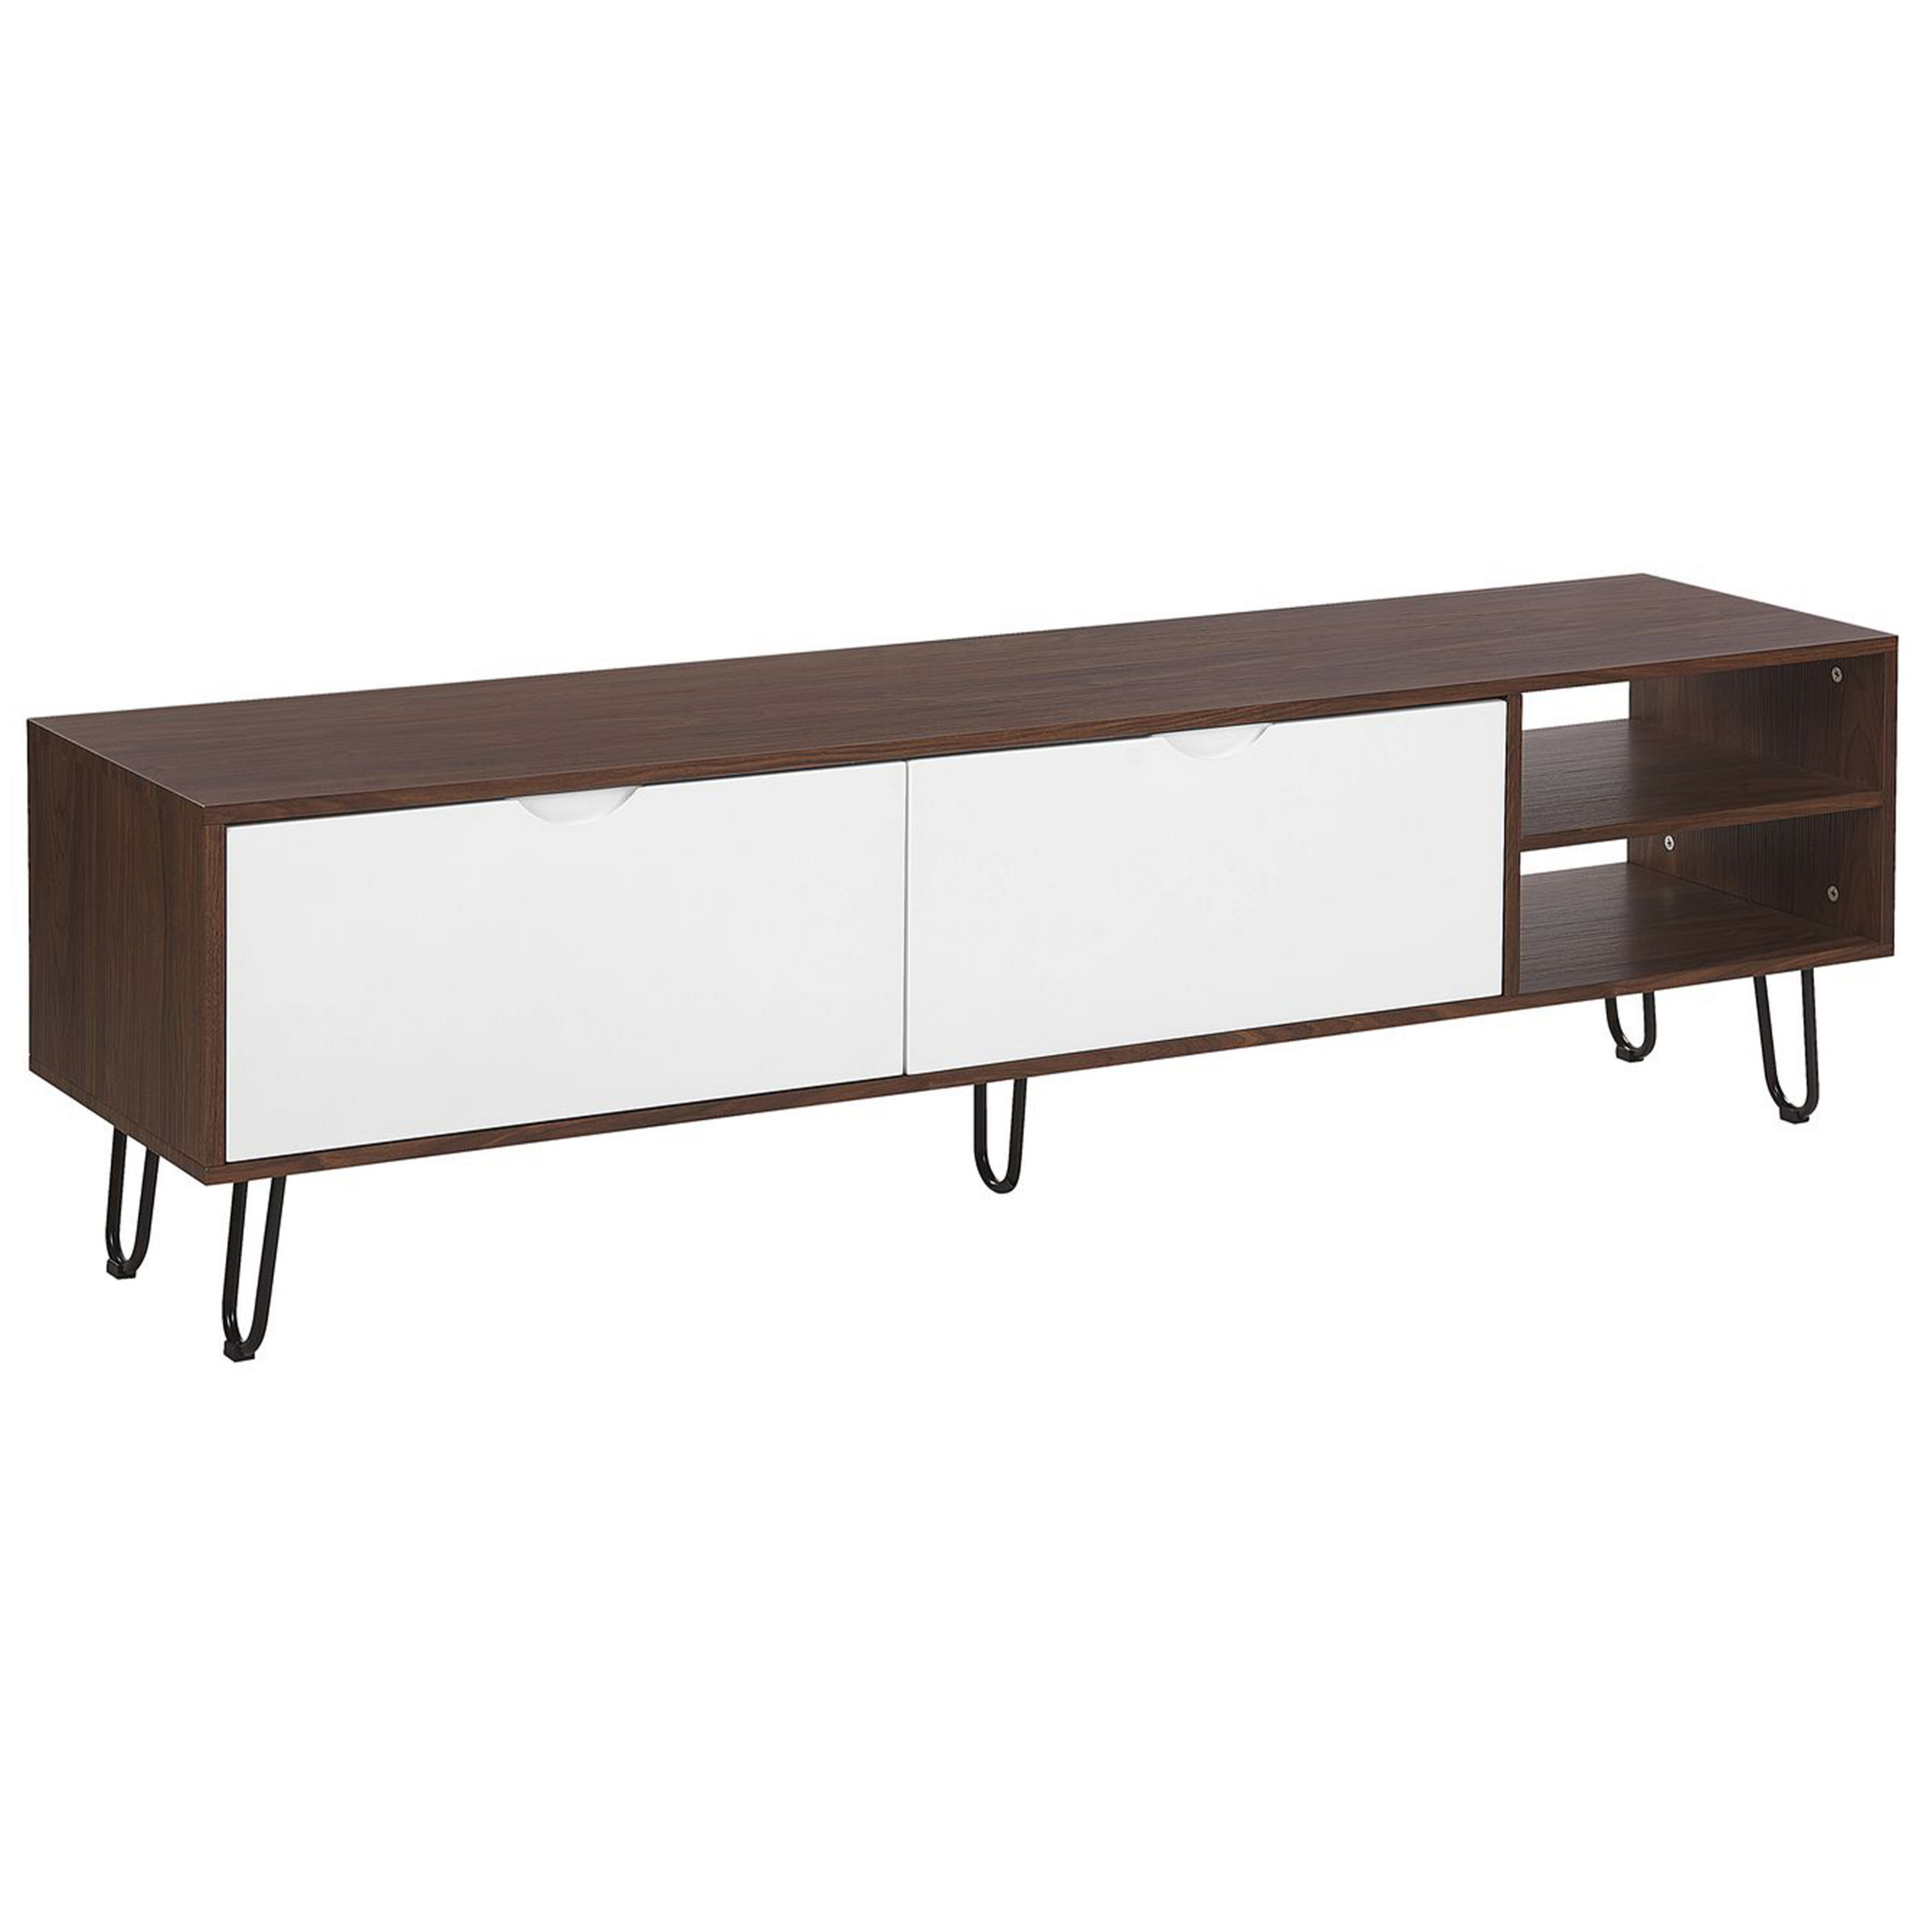 Beliani TV Stand Dark Wood with White For up to 75ʺ TV Media Unit Storage 2 Cabinets Shelf